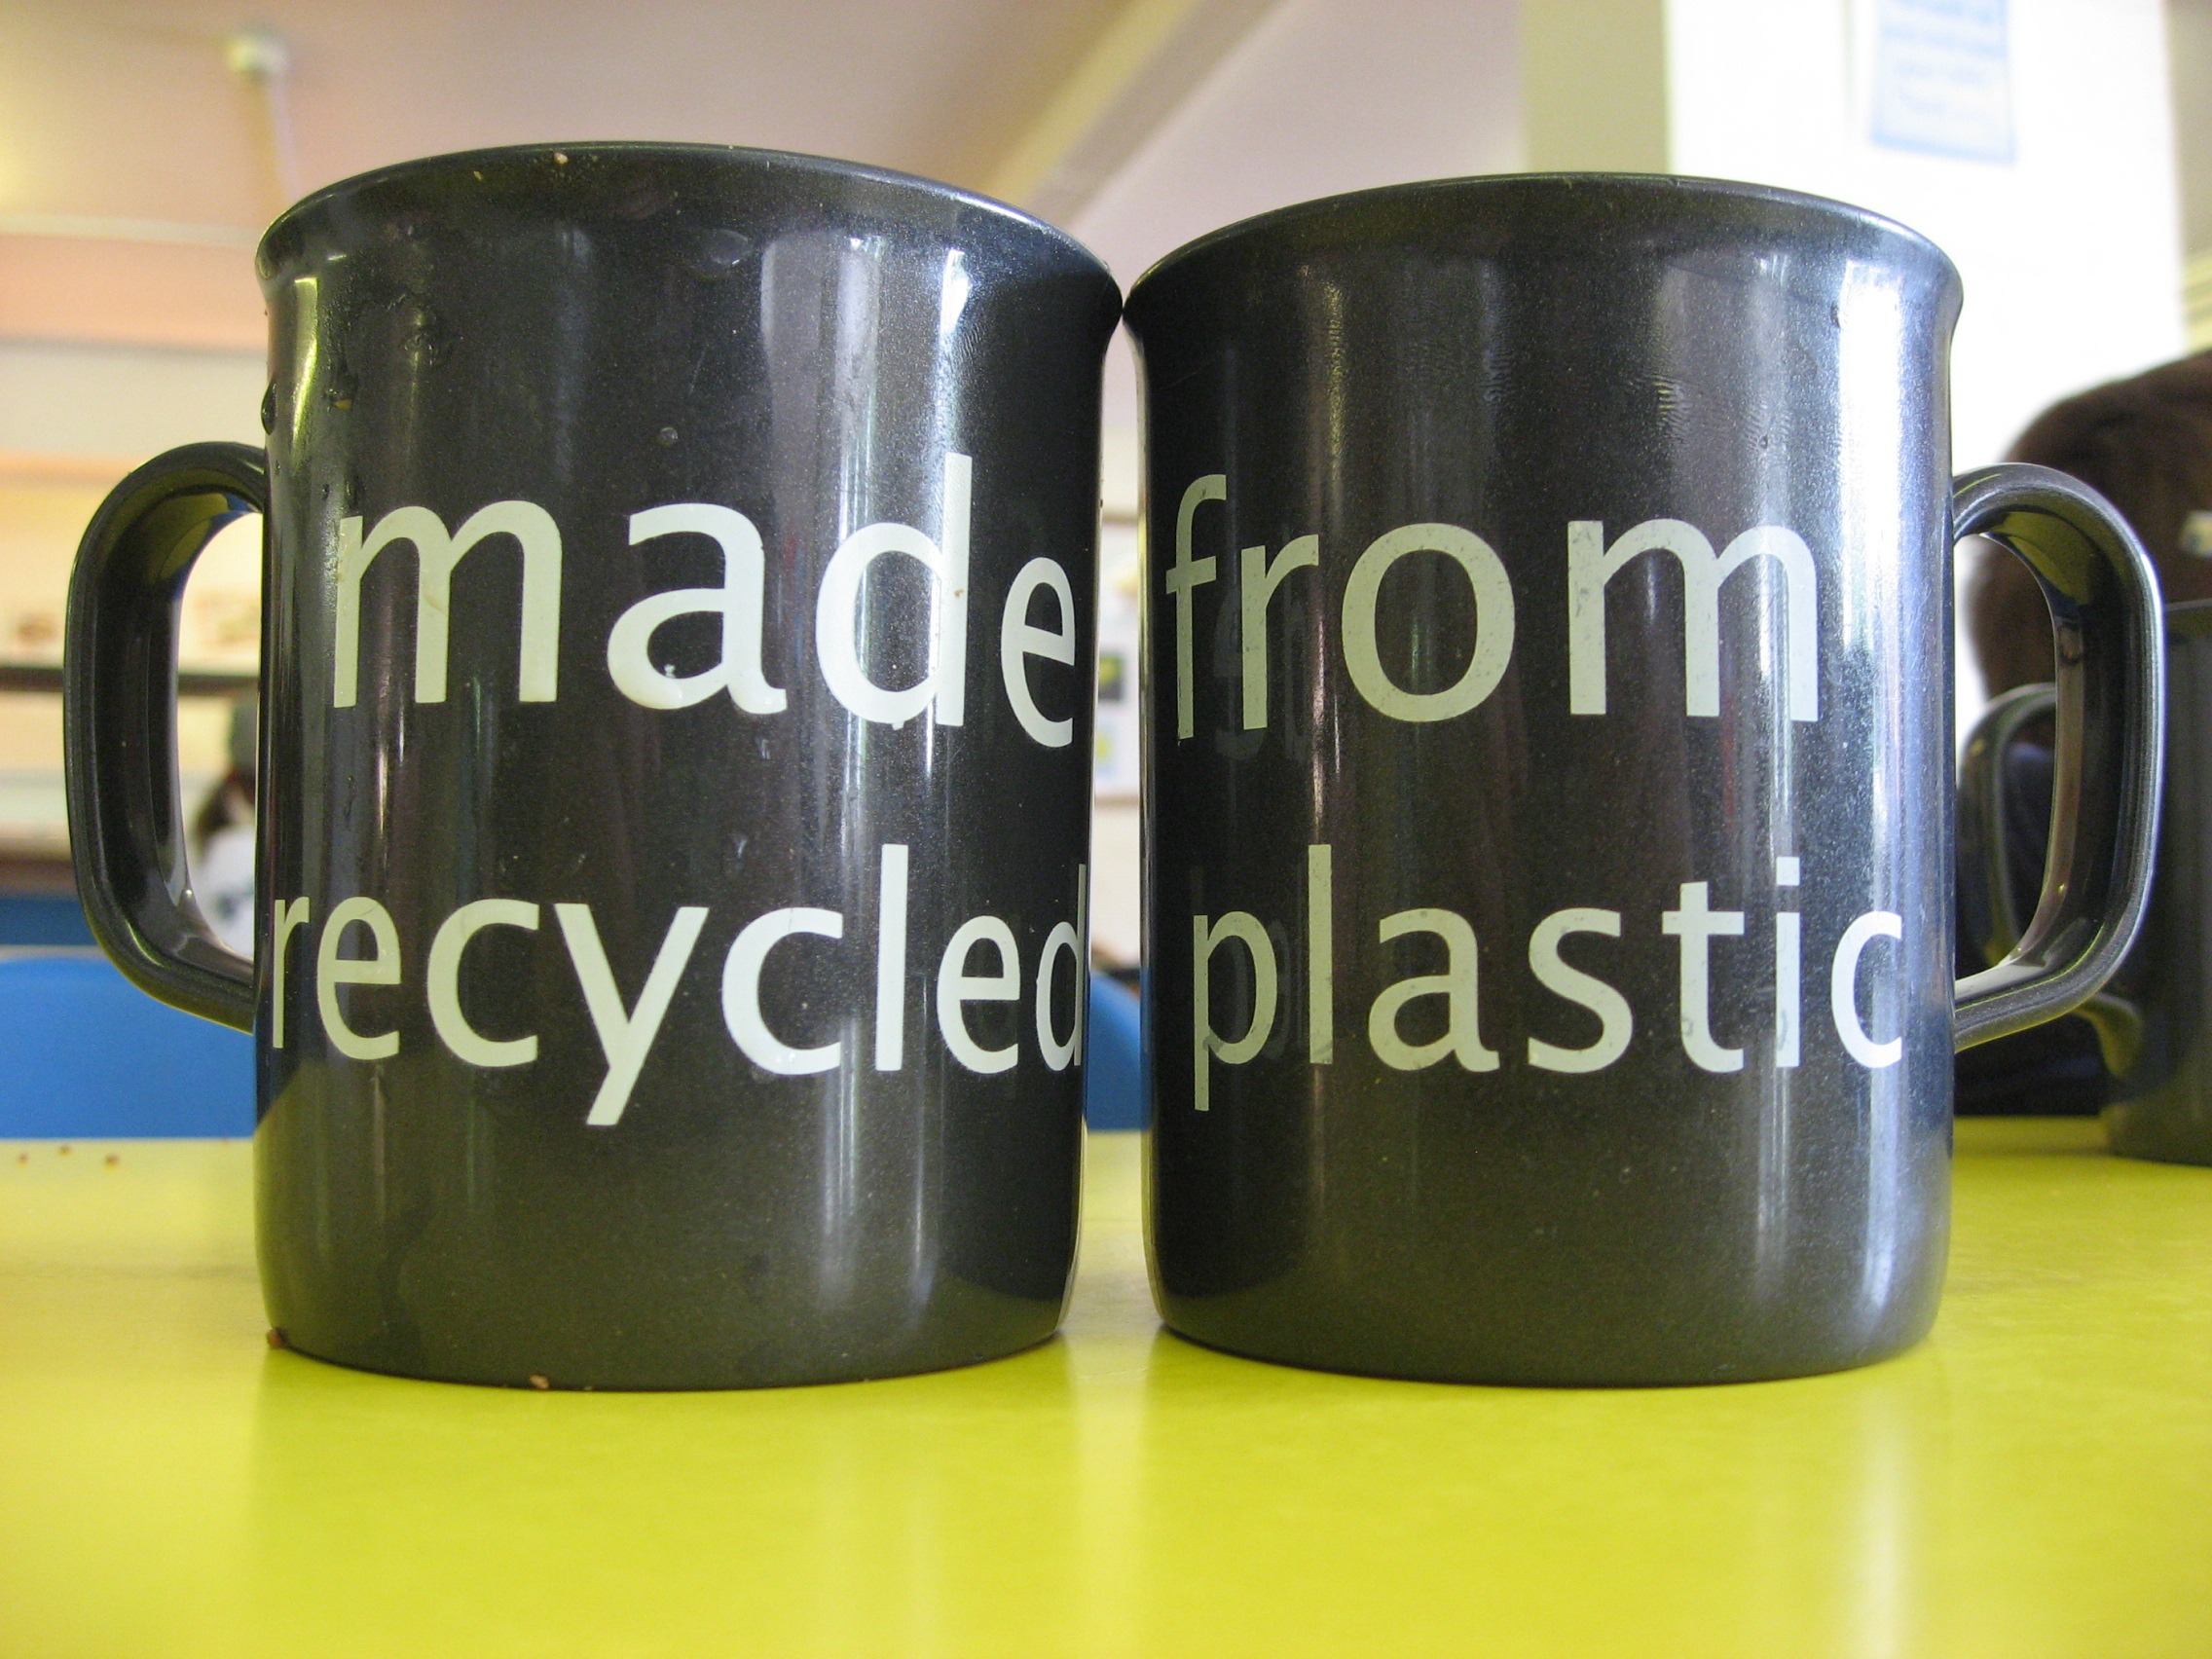 Mugs made from recycled plastic